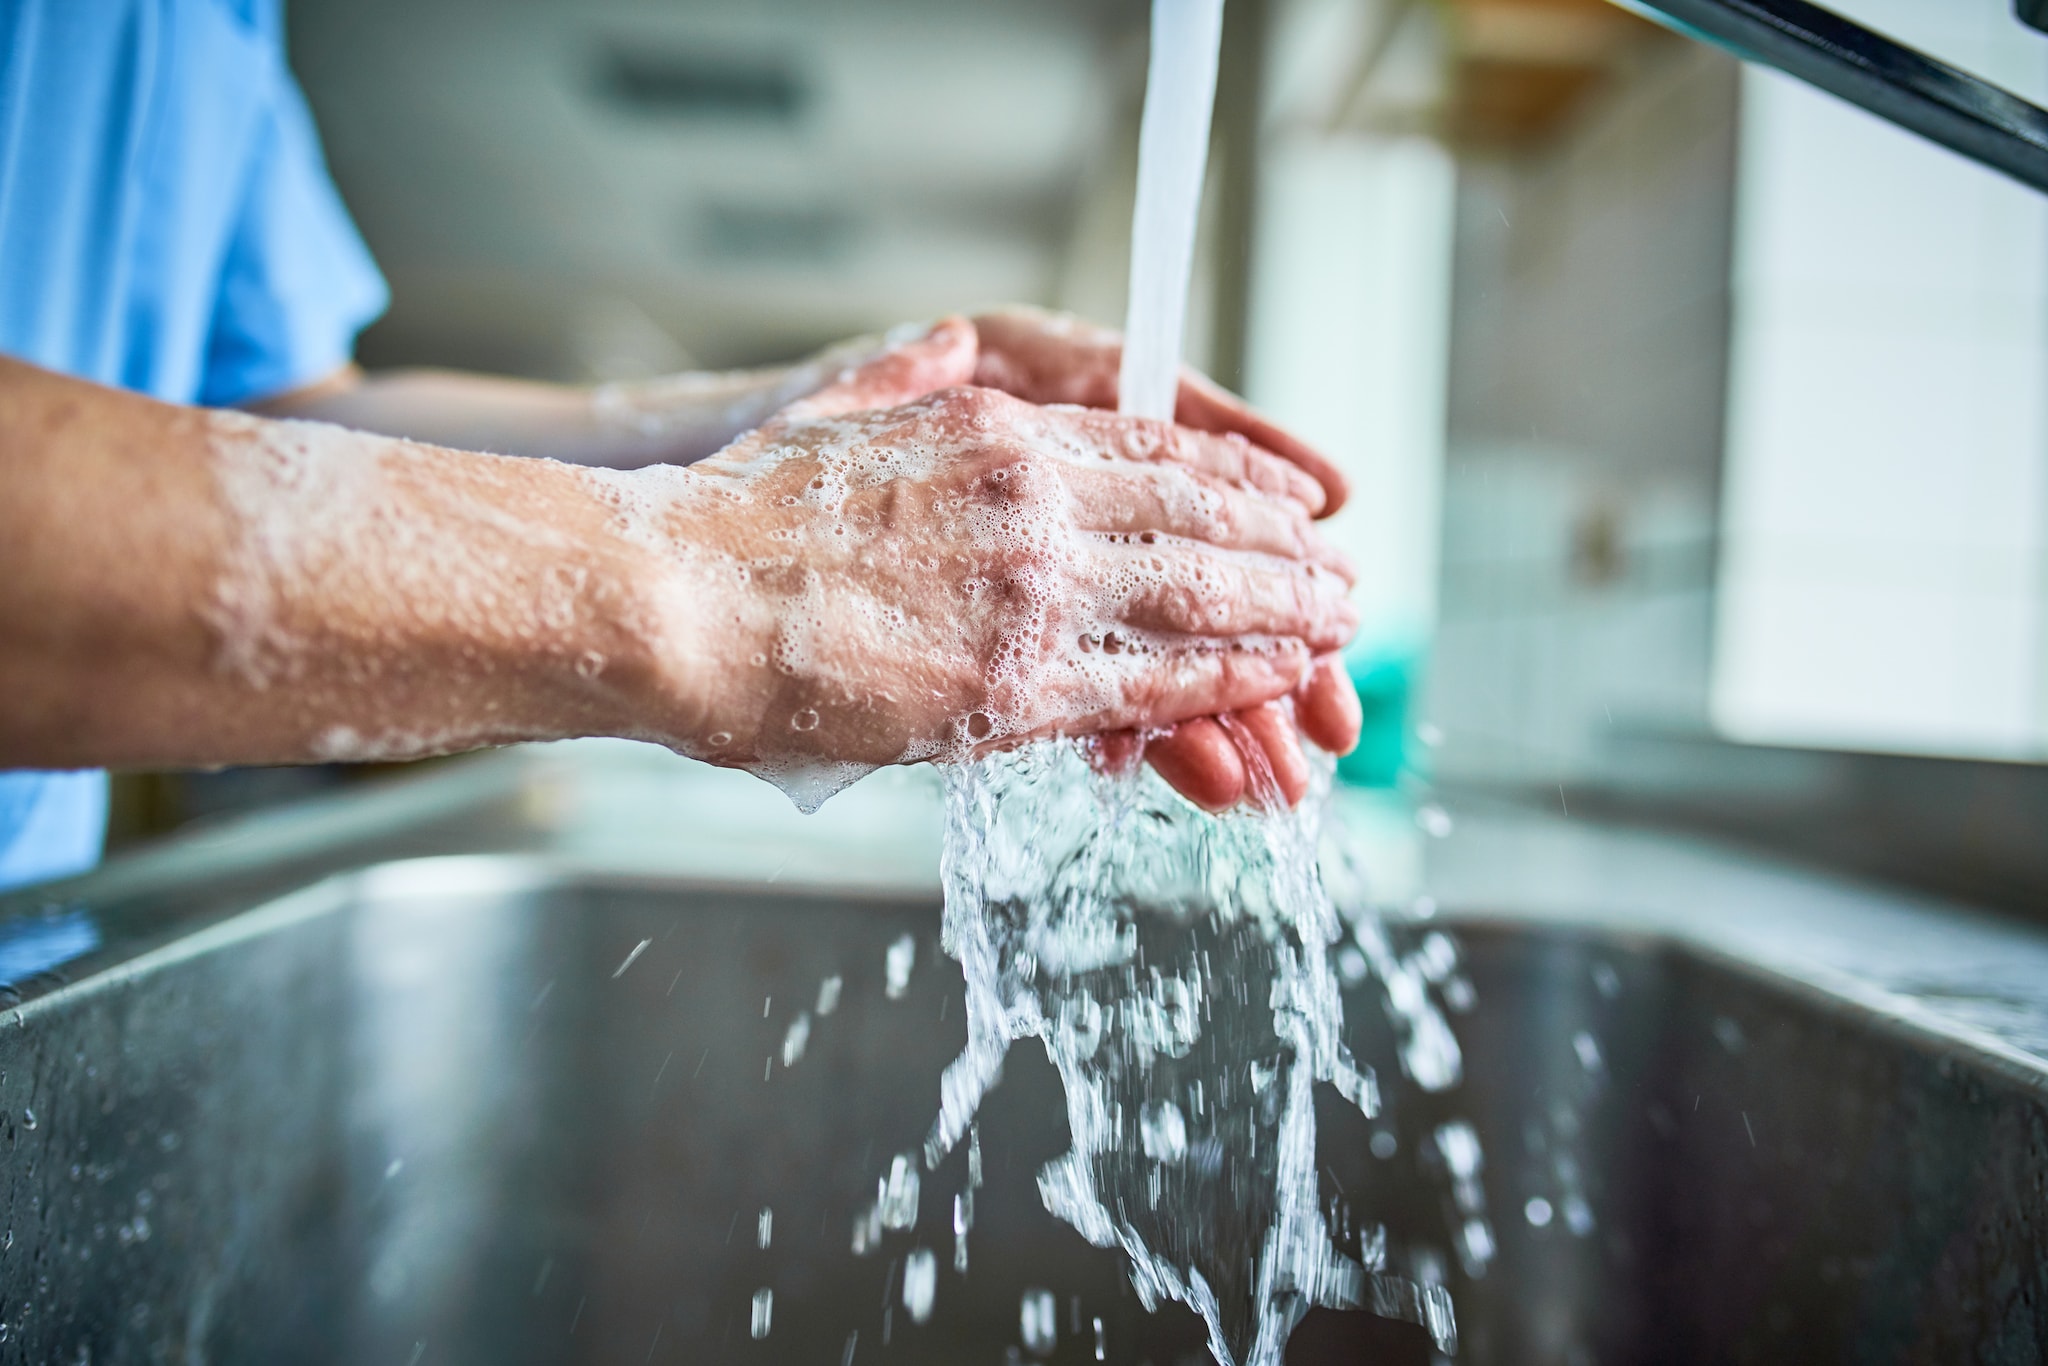 A healthcare worker washing hands with soap